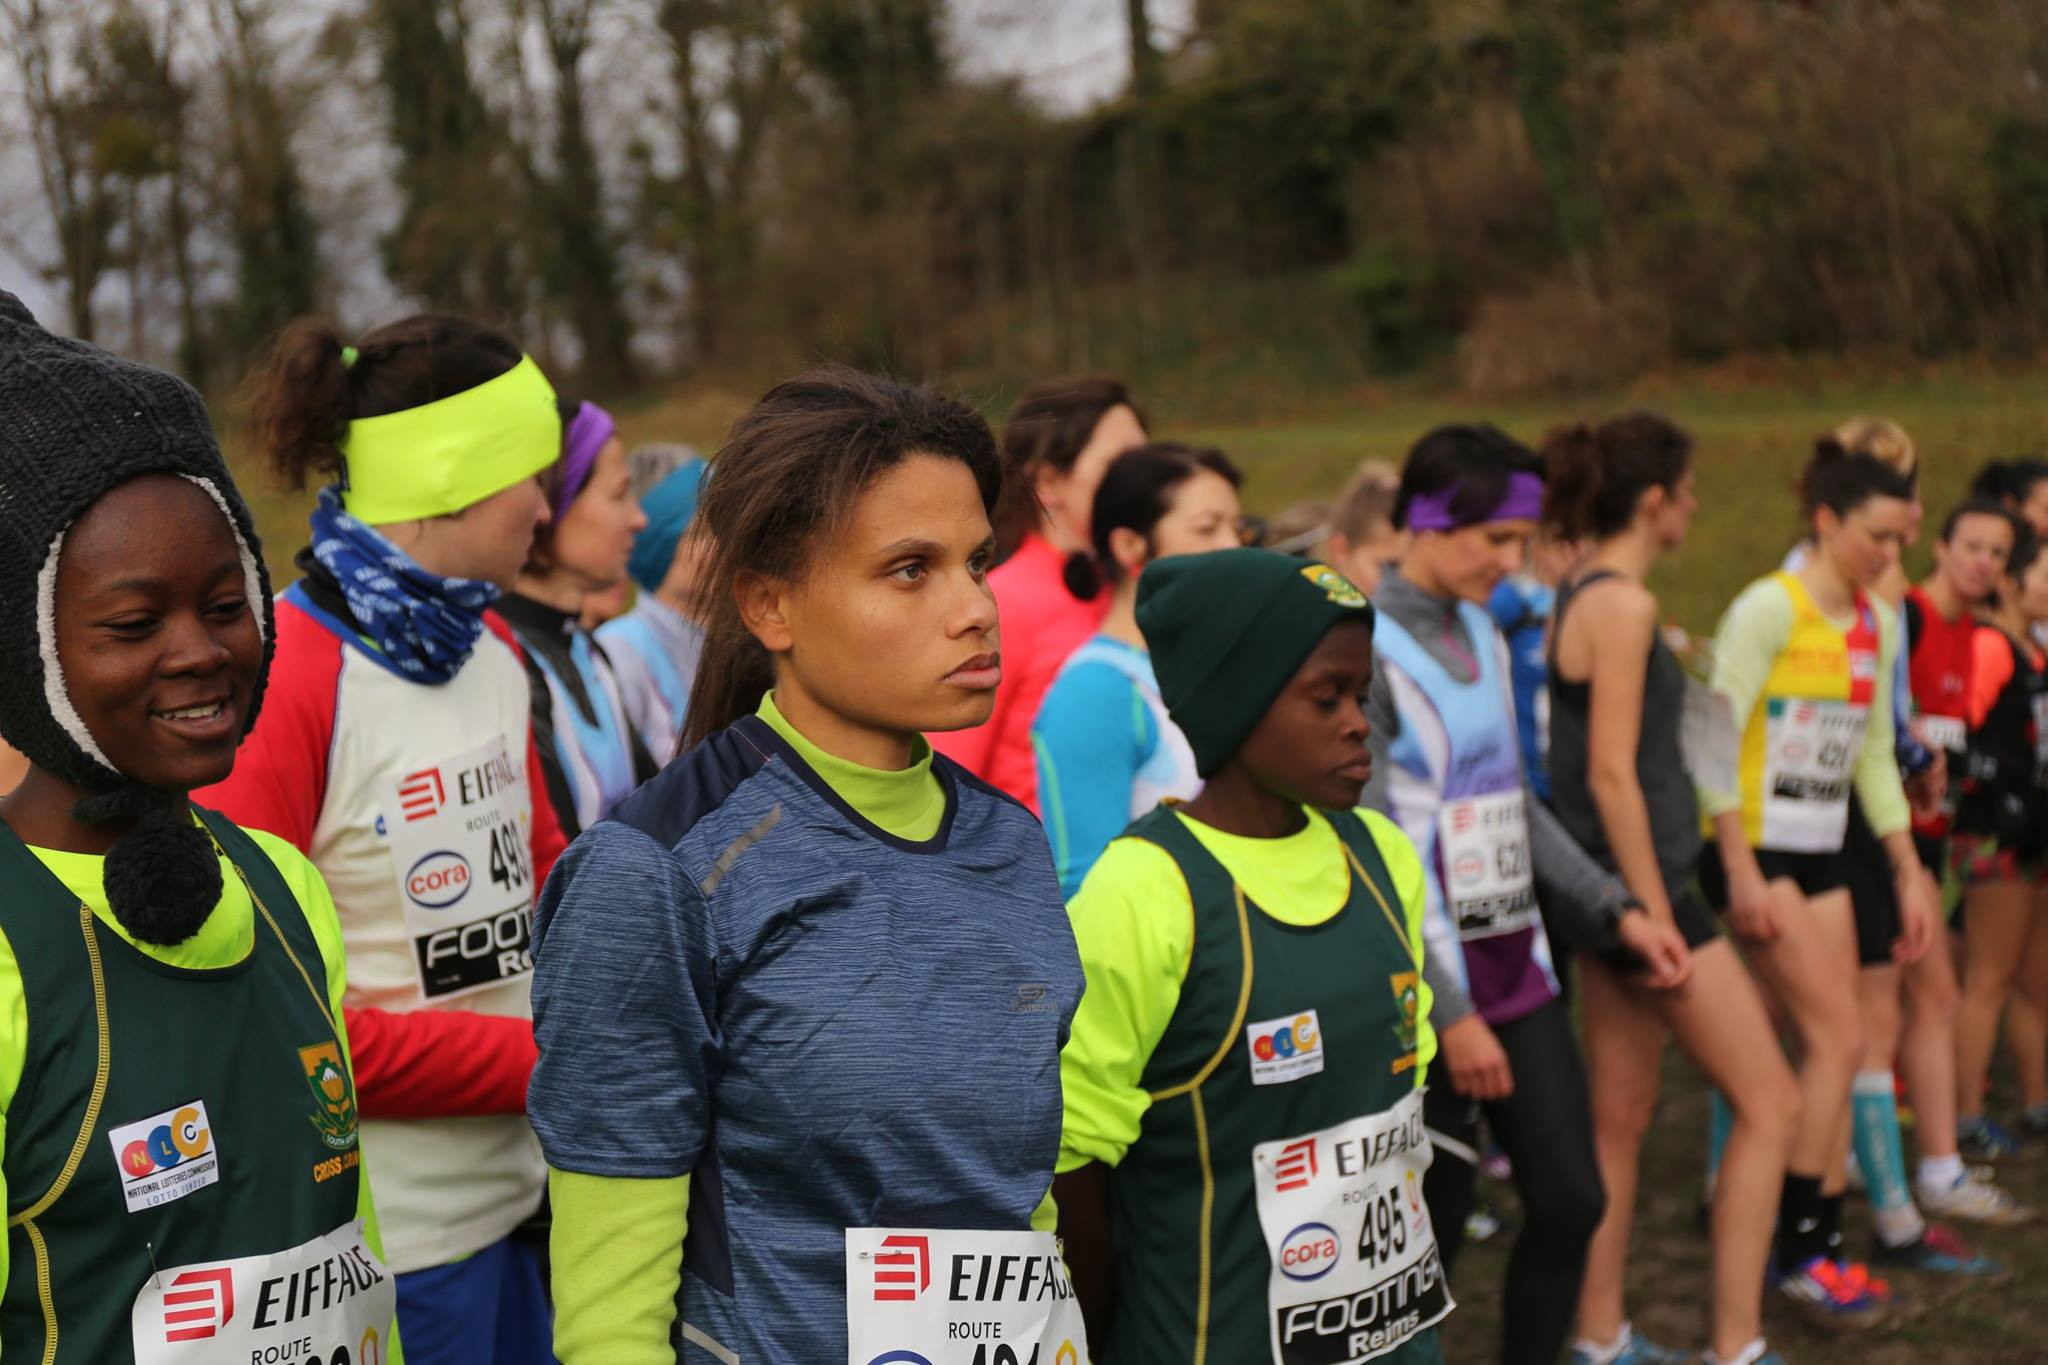 The Inas World Cross-Country Championships was a successful event ©Inas